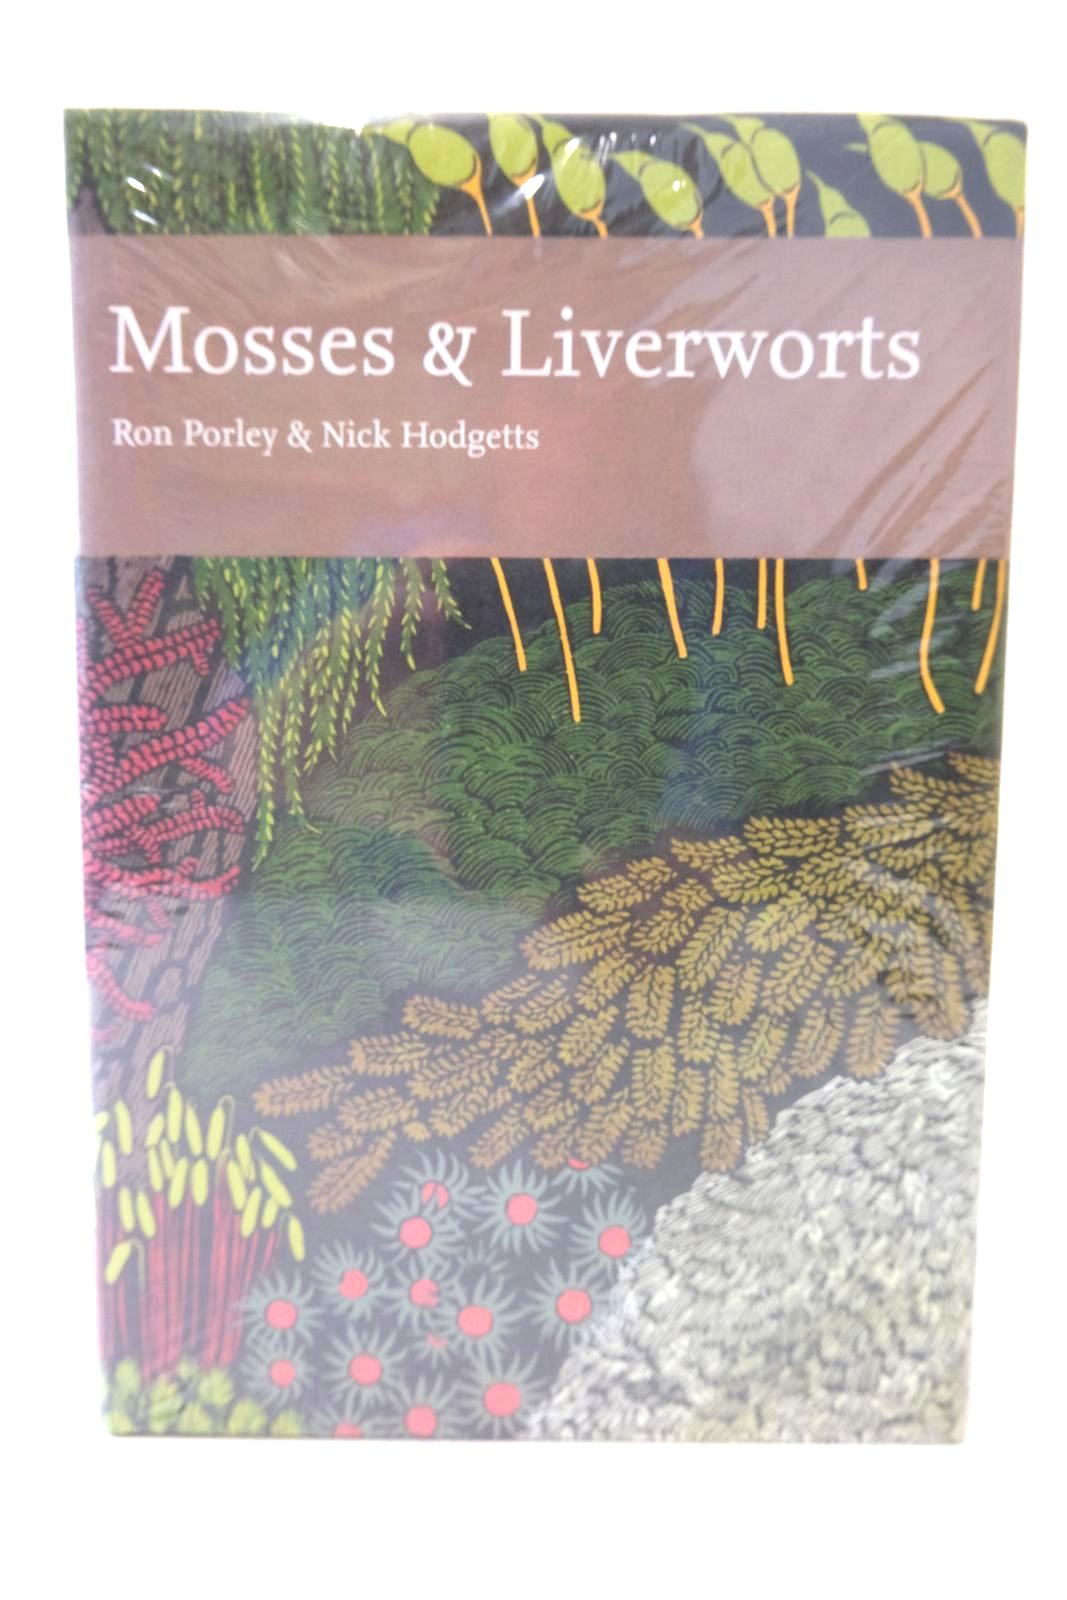 Photo of MOSSES & LIVERWORTS (NN 97) written by Porley, Ron
Hodgetts, Nick published by Collins (STOCK CODE: 1318782)  for sale by Stella & Rose's Books